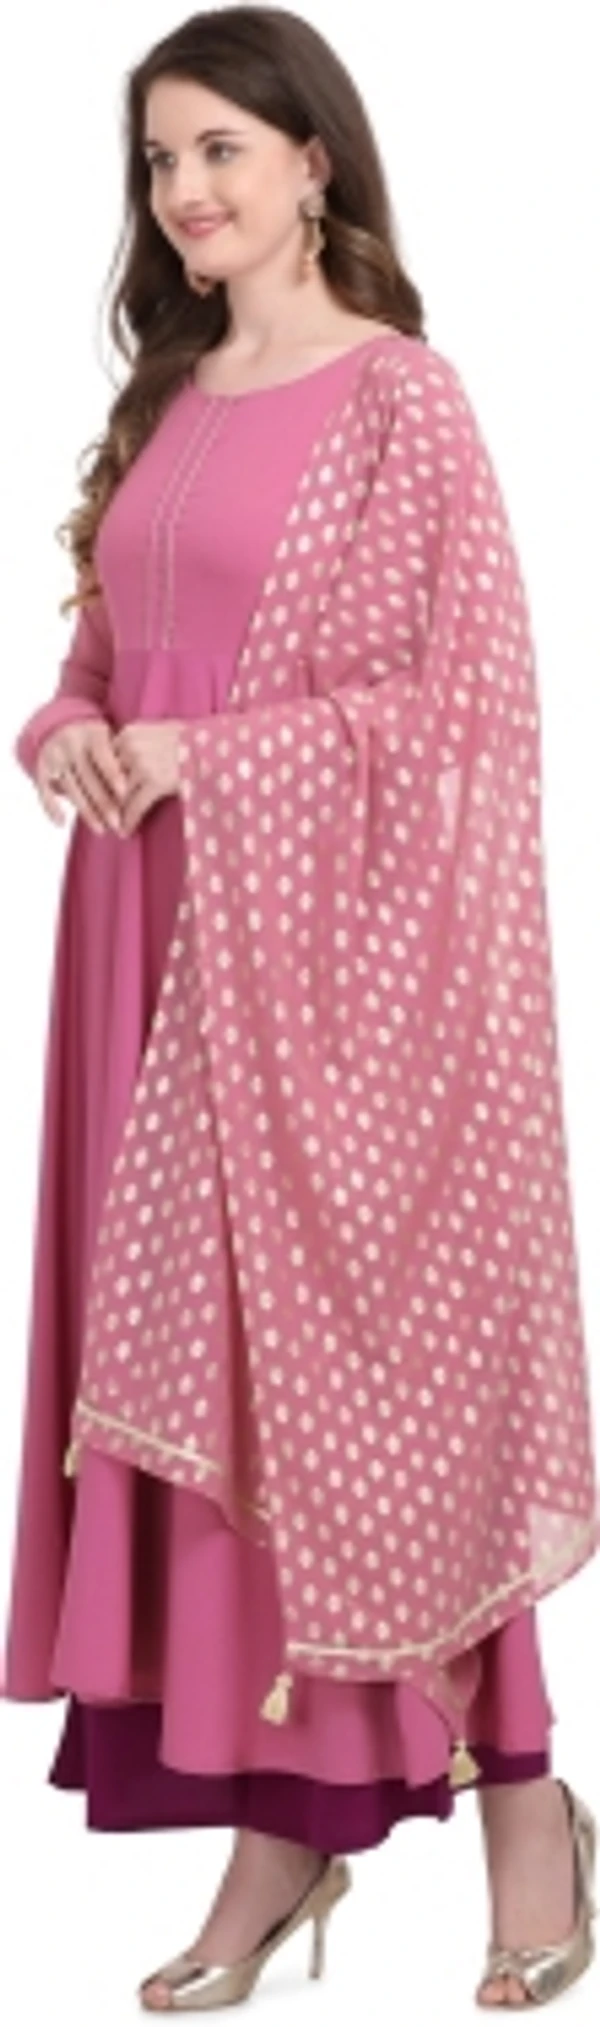 THE FAB FACTORY Women Kurta and Dupatta SetGeorgette, Crepe FabricFull SleeveSolid PatternColor: PinkFor Women10 Days Return Policy, No questions asked. - XL